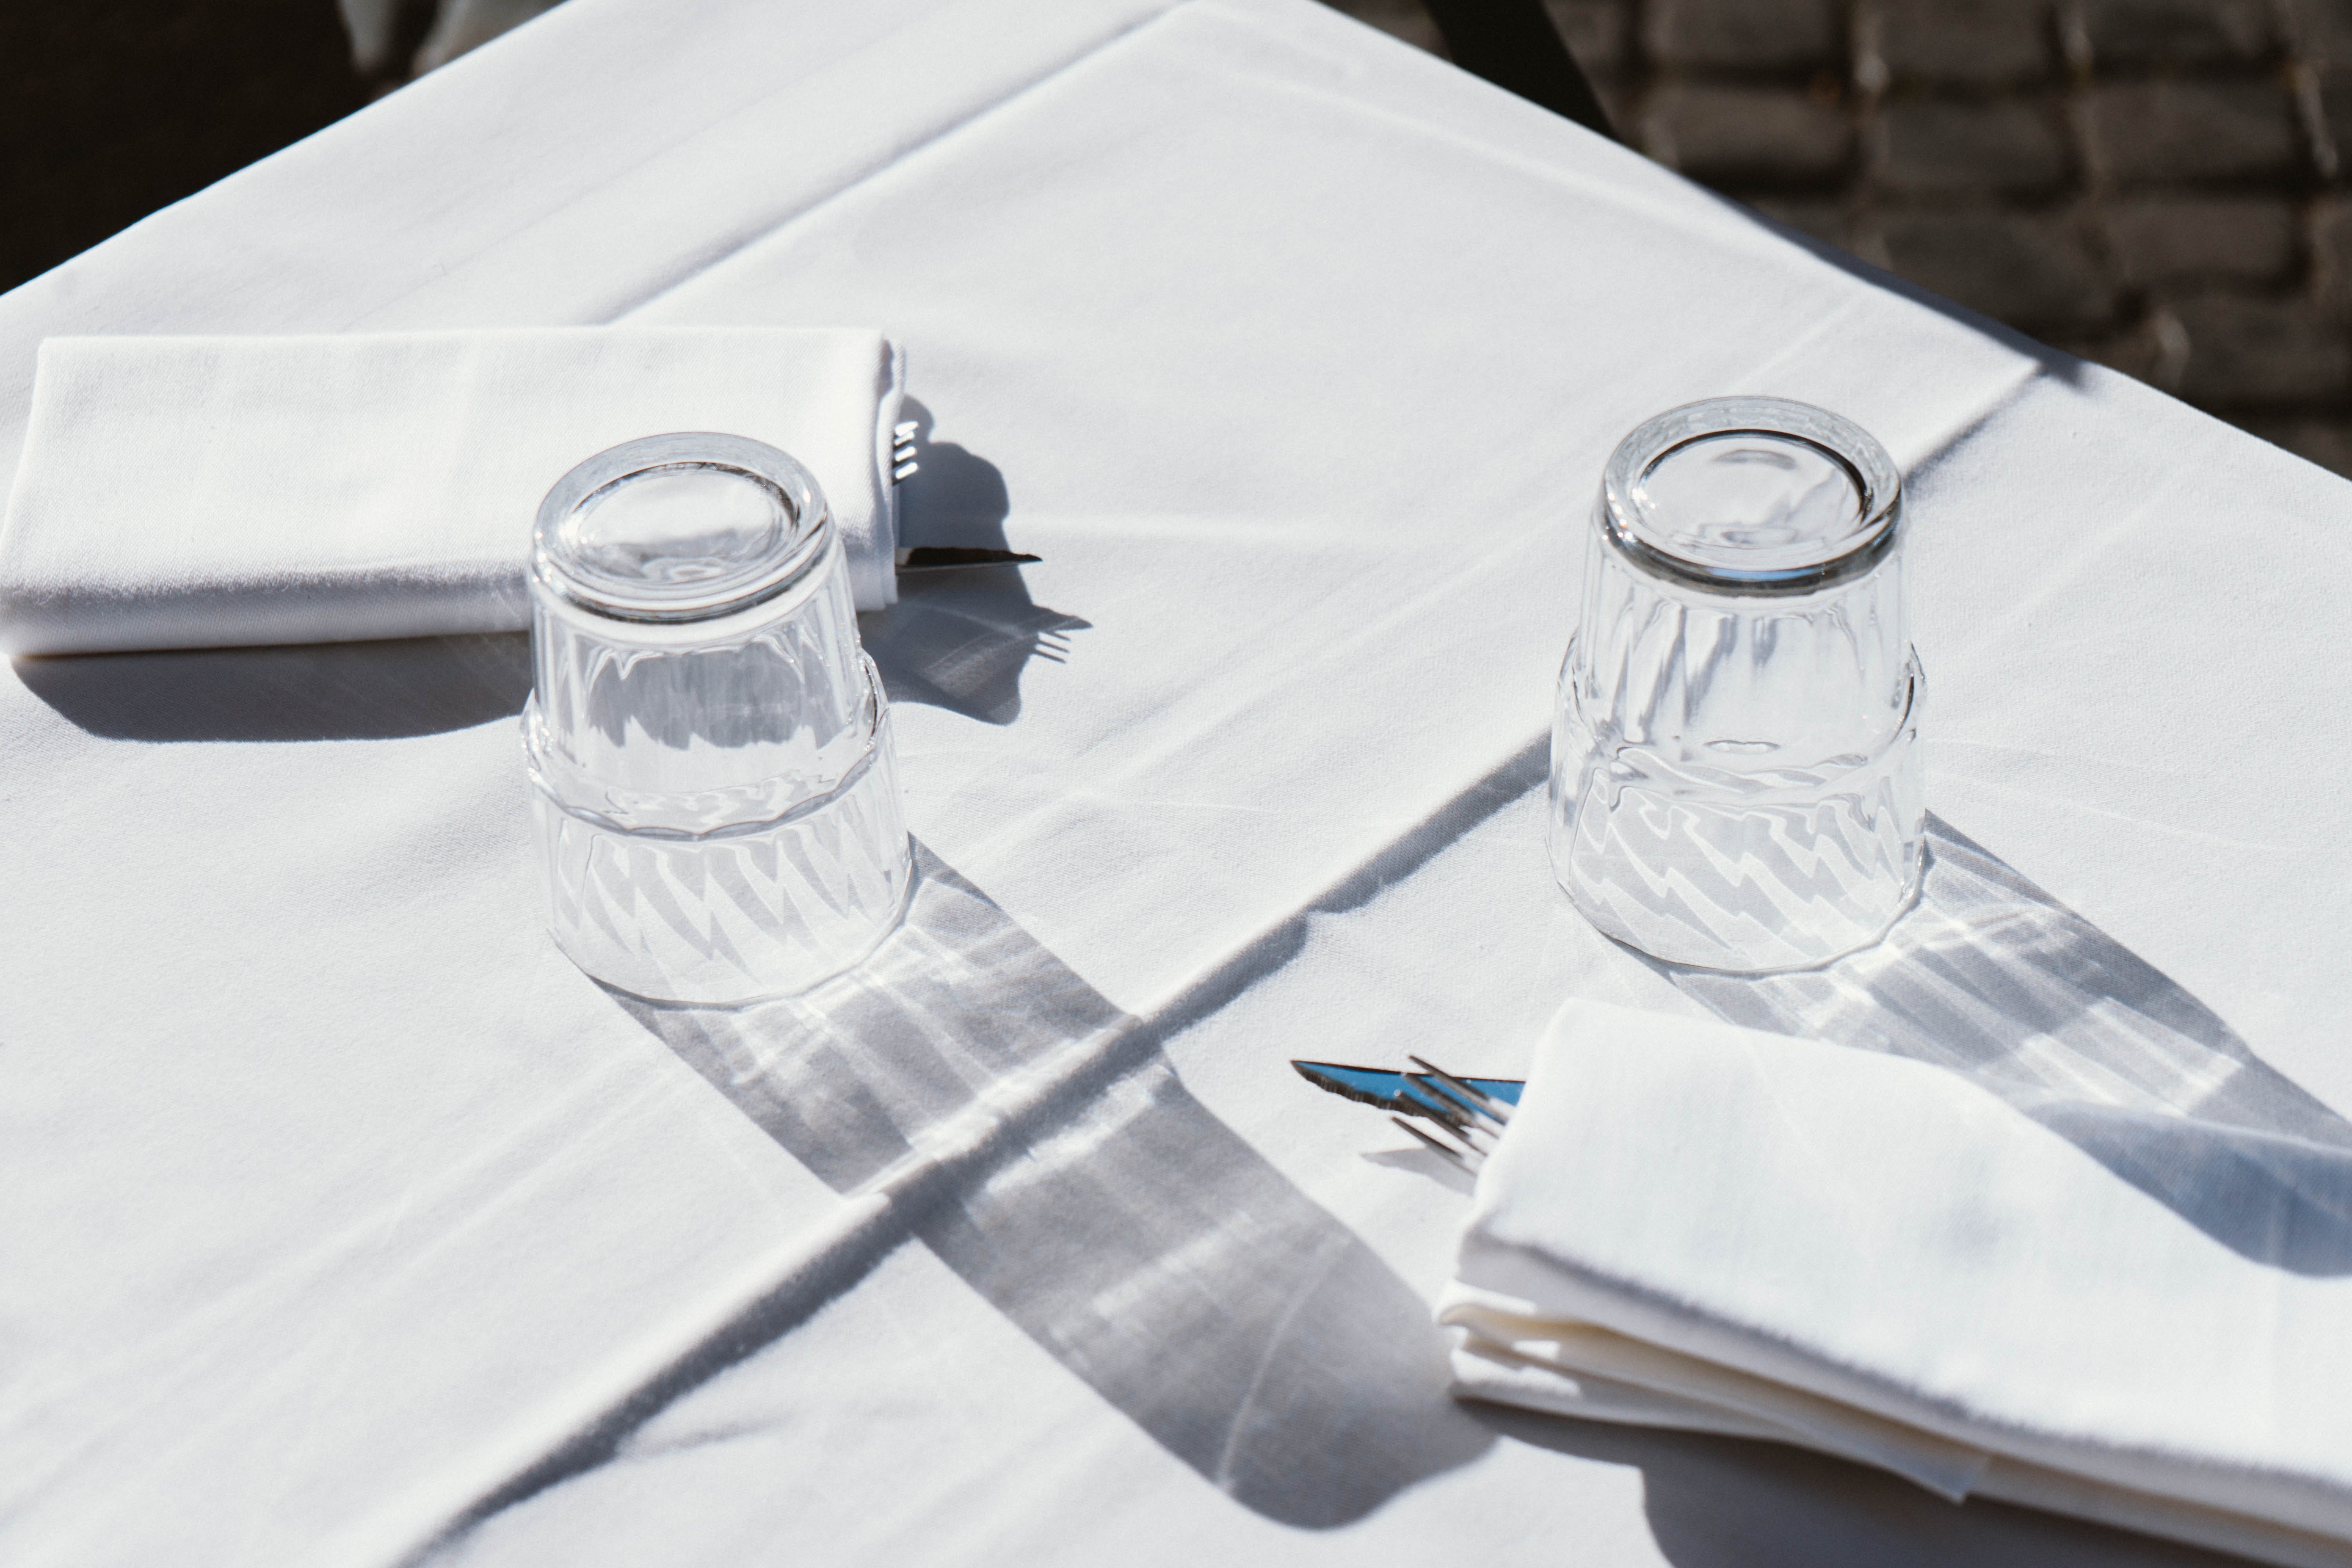 A dining table with glasses and napkins. | Source: Pexels